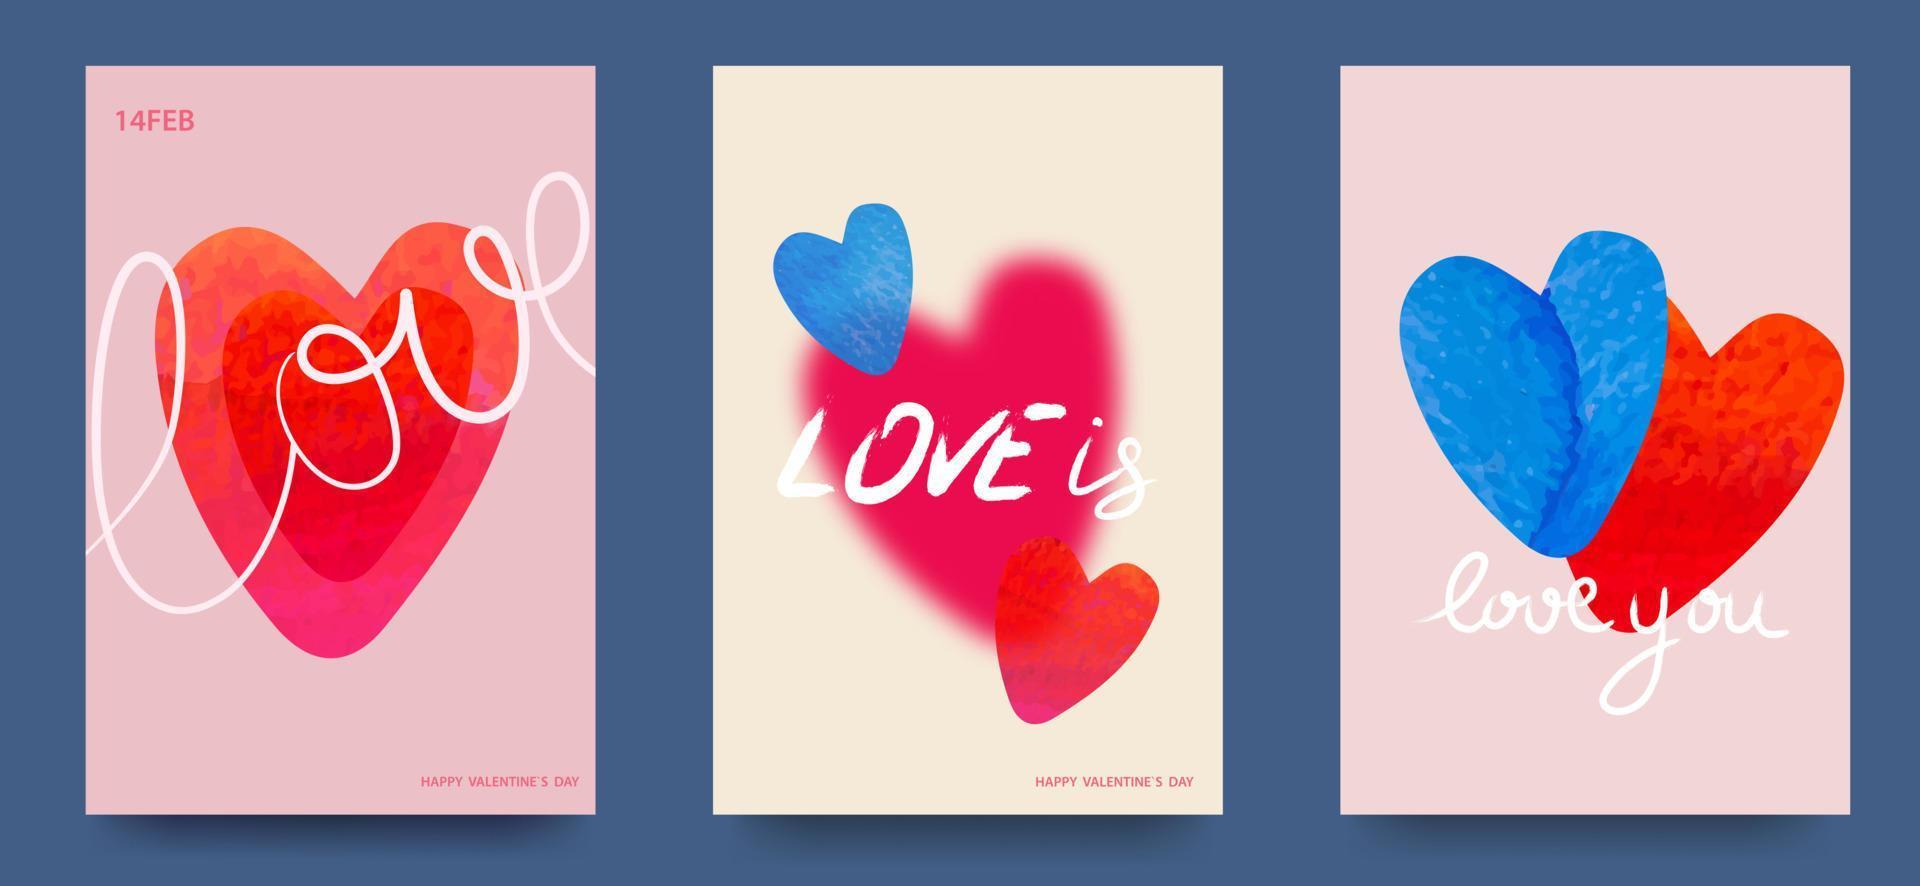 Happy Valentine s Day greeting cards. Fashion gradients. Social media story templates for digital marketing and sales promotion. Watercolor hearts. Vector illustration